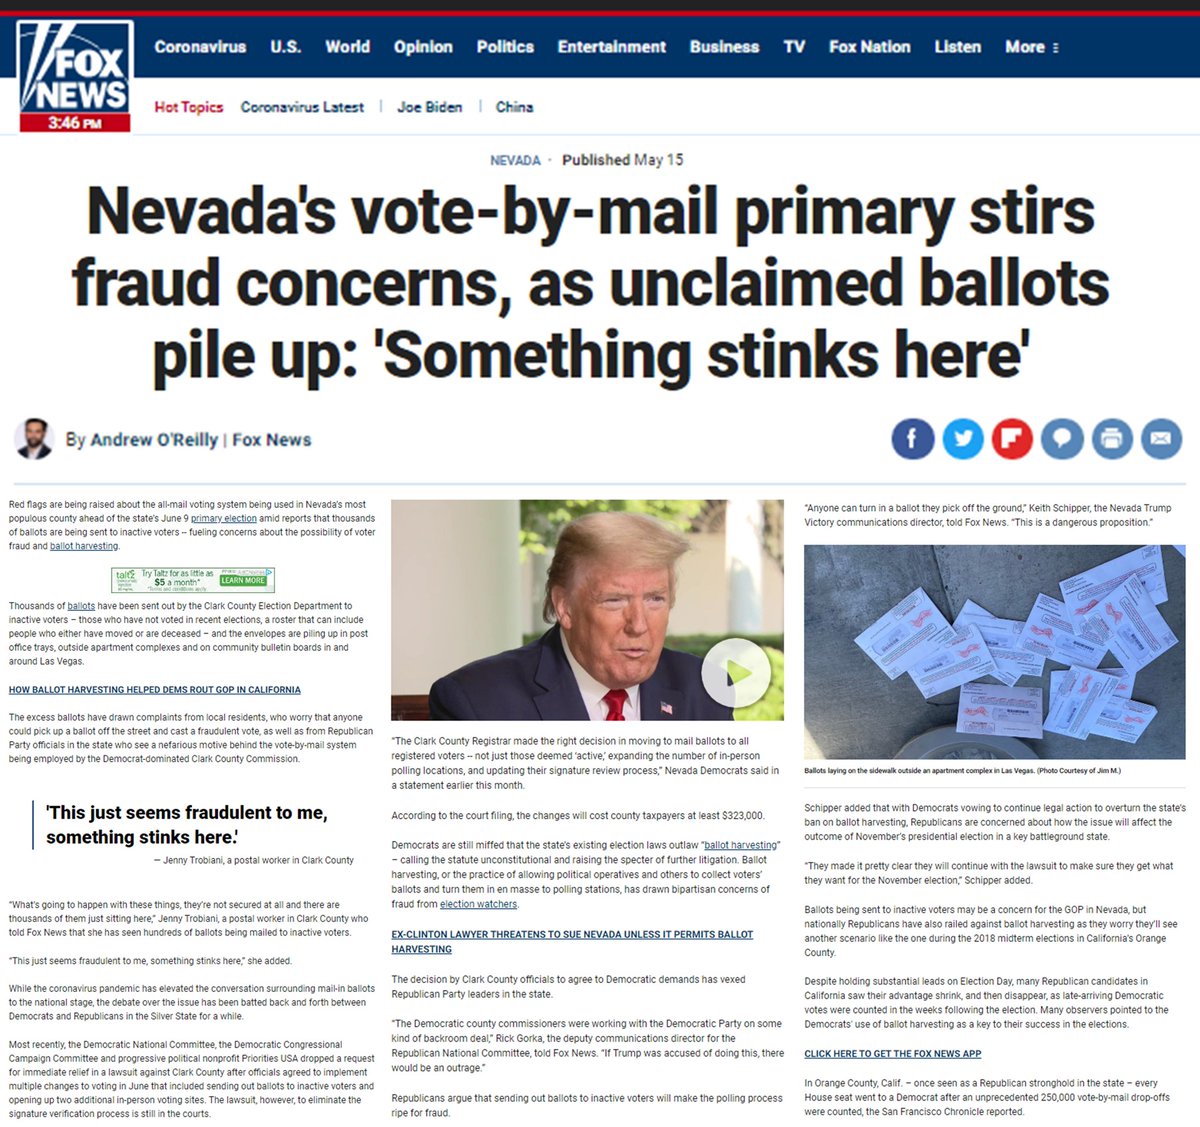 [22] Nevada's Vote By Mail Primary Fraught With Fraud. Blank & Completed Ballots Discovered on Street: "SOMETHING STINKS HERE" https://www.foxnews.com/politics/nevadas-vote-by-mail-primary-fraud-concerns2020 Presidential Primary ElectionQui Bono: DemocratsState: South Nevada